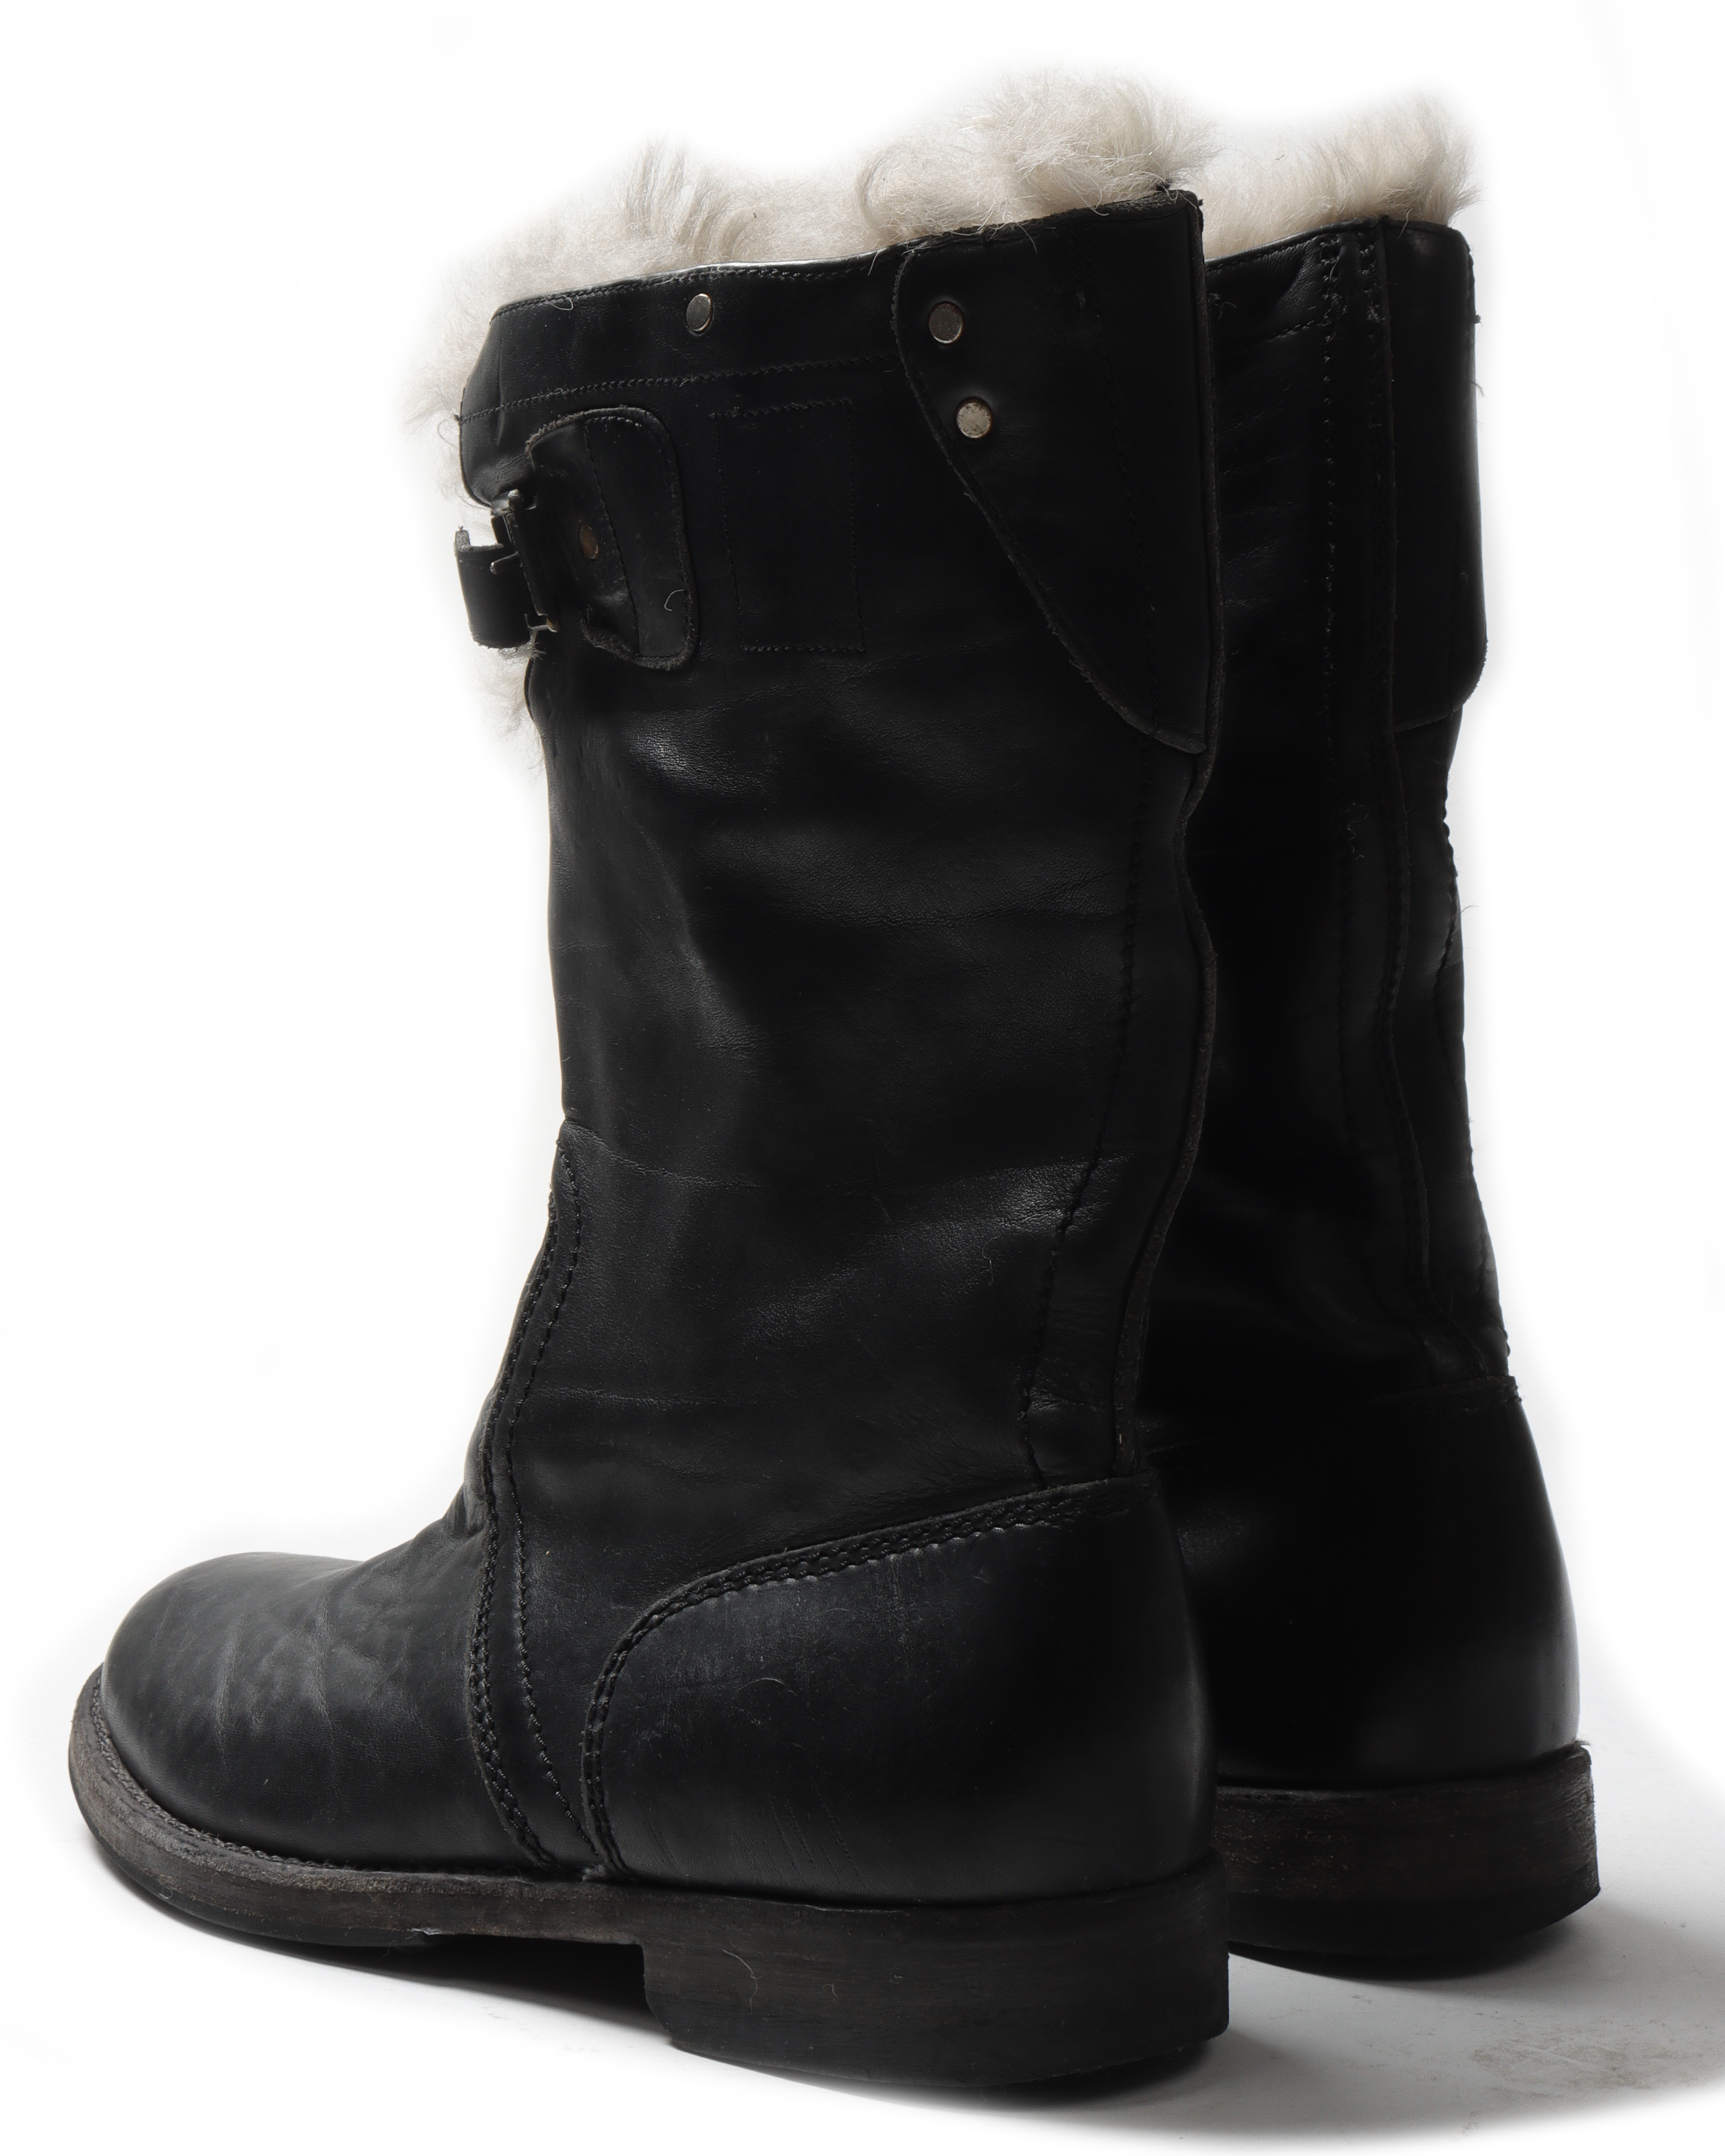 Fur-Lined Boots